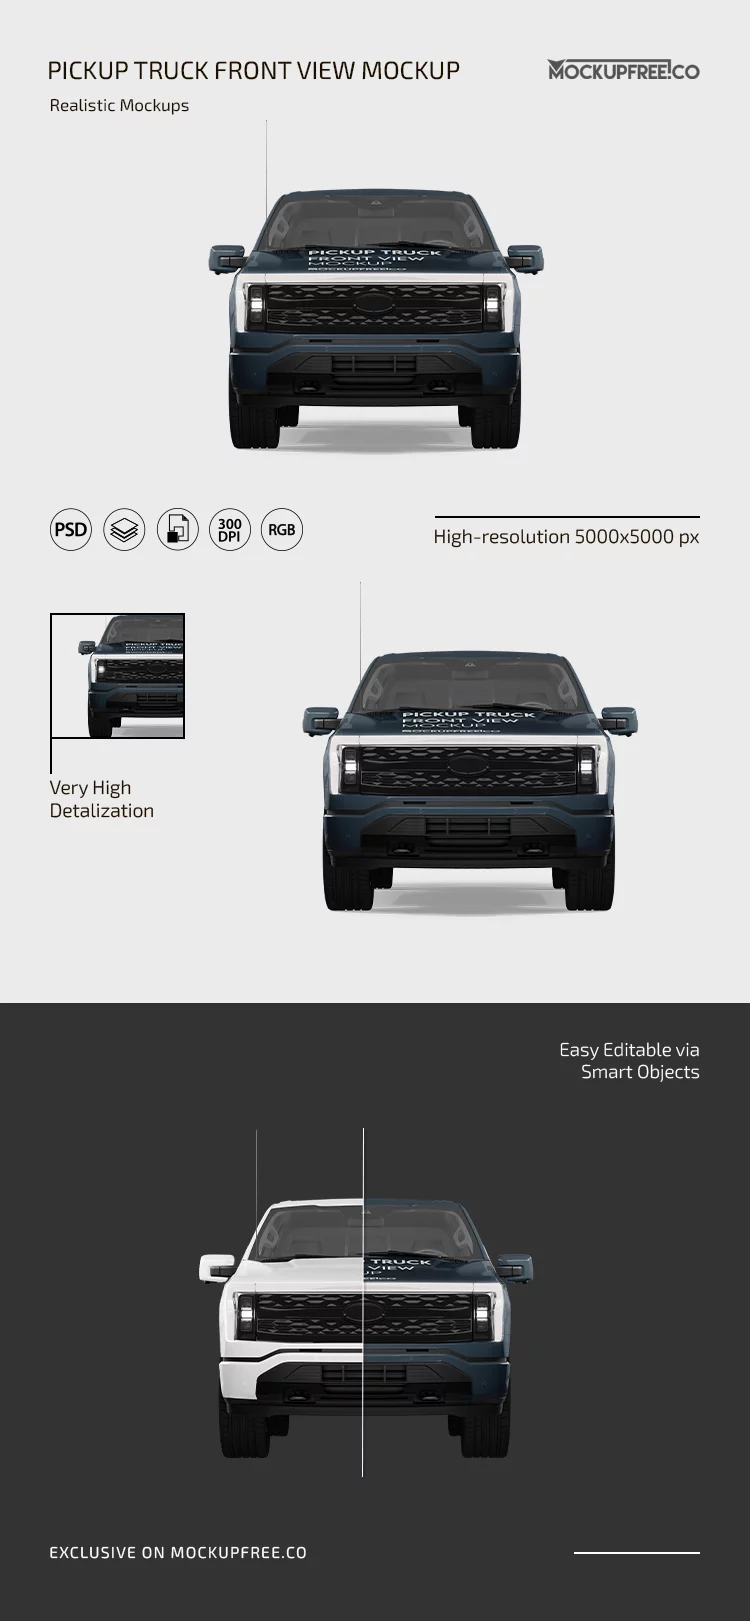 Pickup Truck Front View Mockup